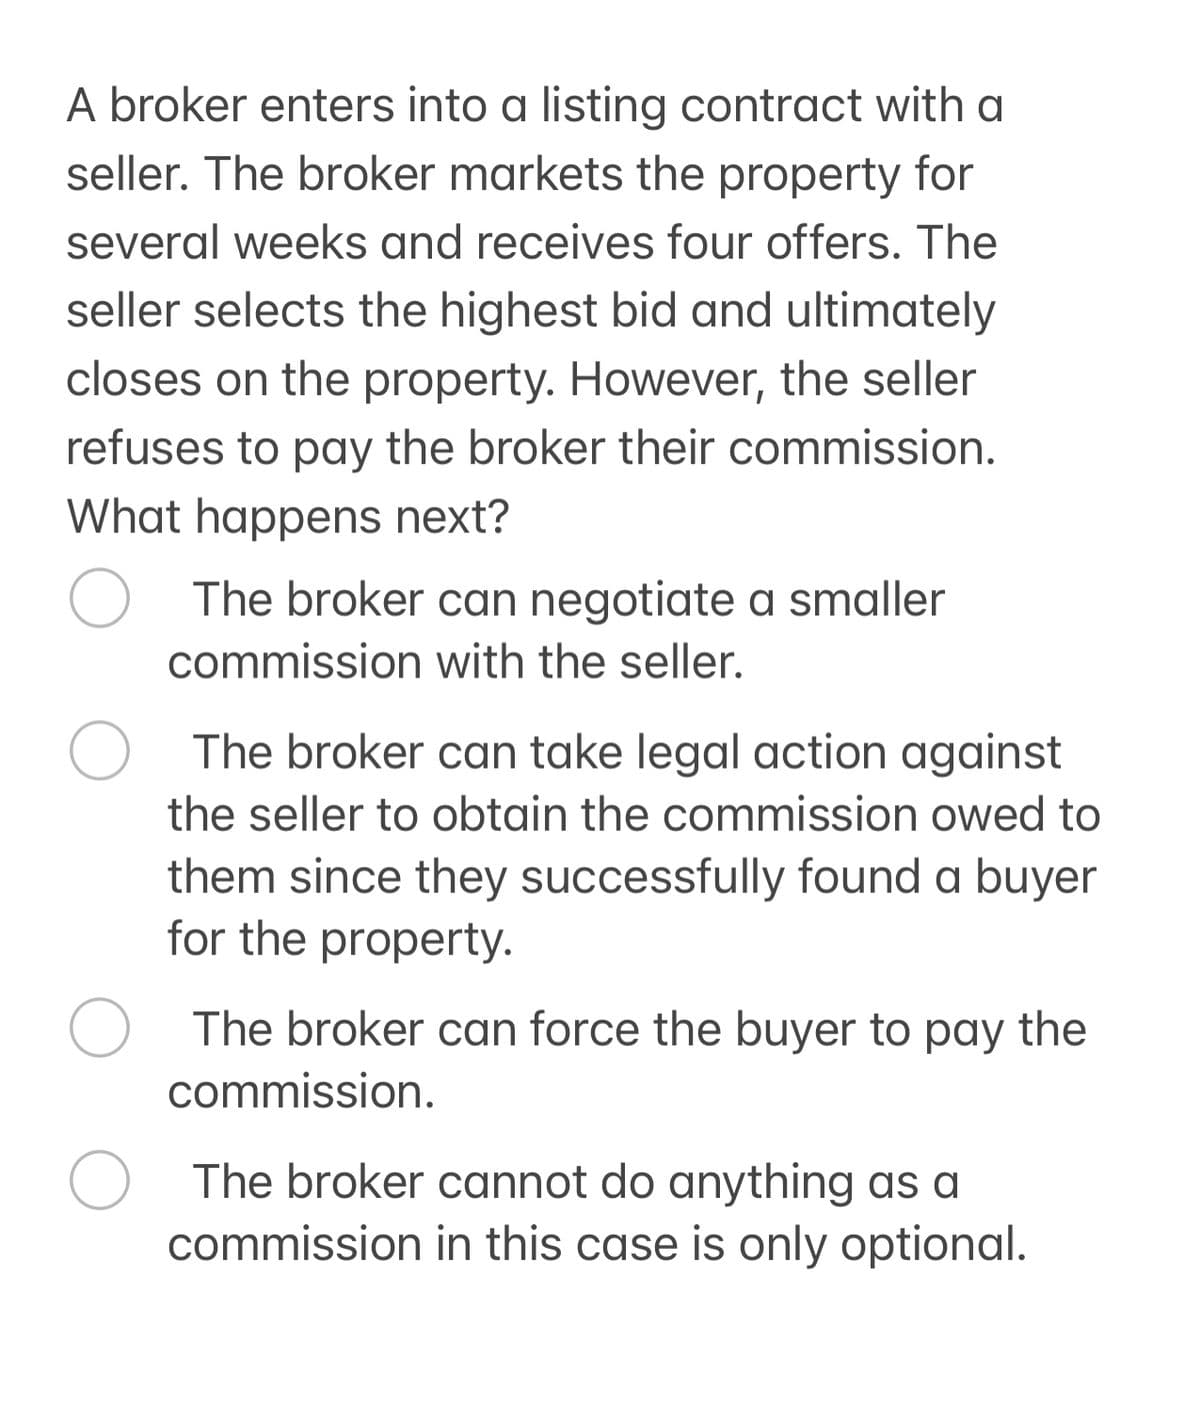 A broker enters into a listing contract with a
seller. The broker markets the property for
several weeks and receives four offers. The
seller selects the highest bid and ultimately
closes on the property. However, the seller
refuses to pay the broker their commission.
What happens next?
The broker can negotiate a smaller
commission with the seller.
О The broker can take legal action against
the seller to obtain the commission owed to
them since they successfully found a buyer
for the property.
О The broker can force the buyer to pay the
commission.
The broker cannot do anything as a
commission in this case is only optional.